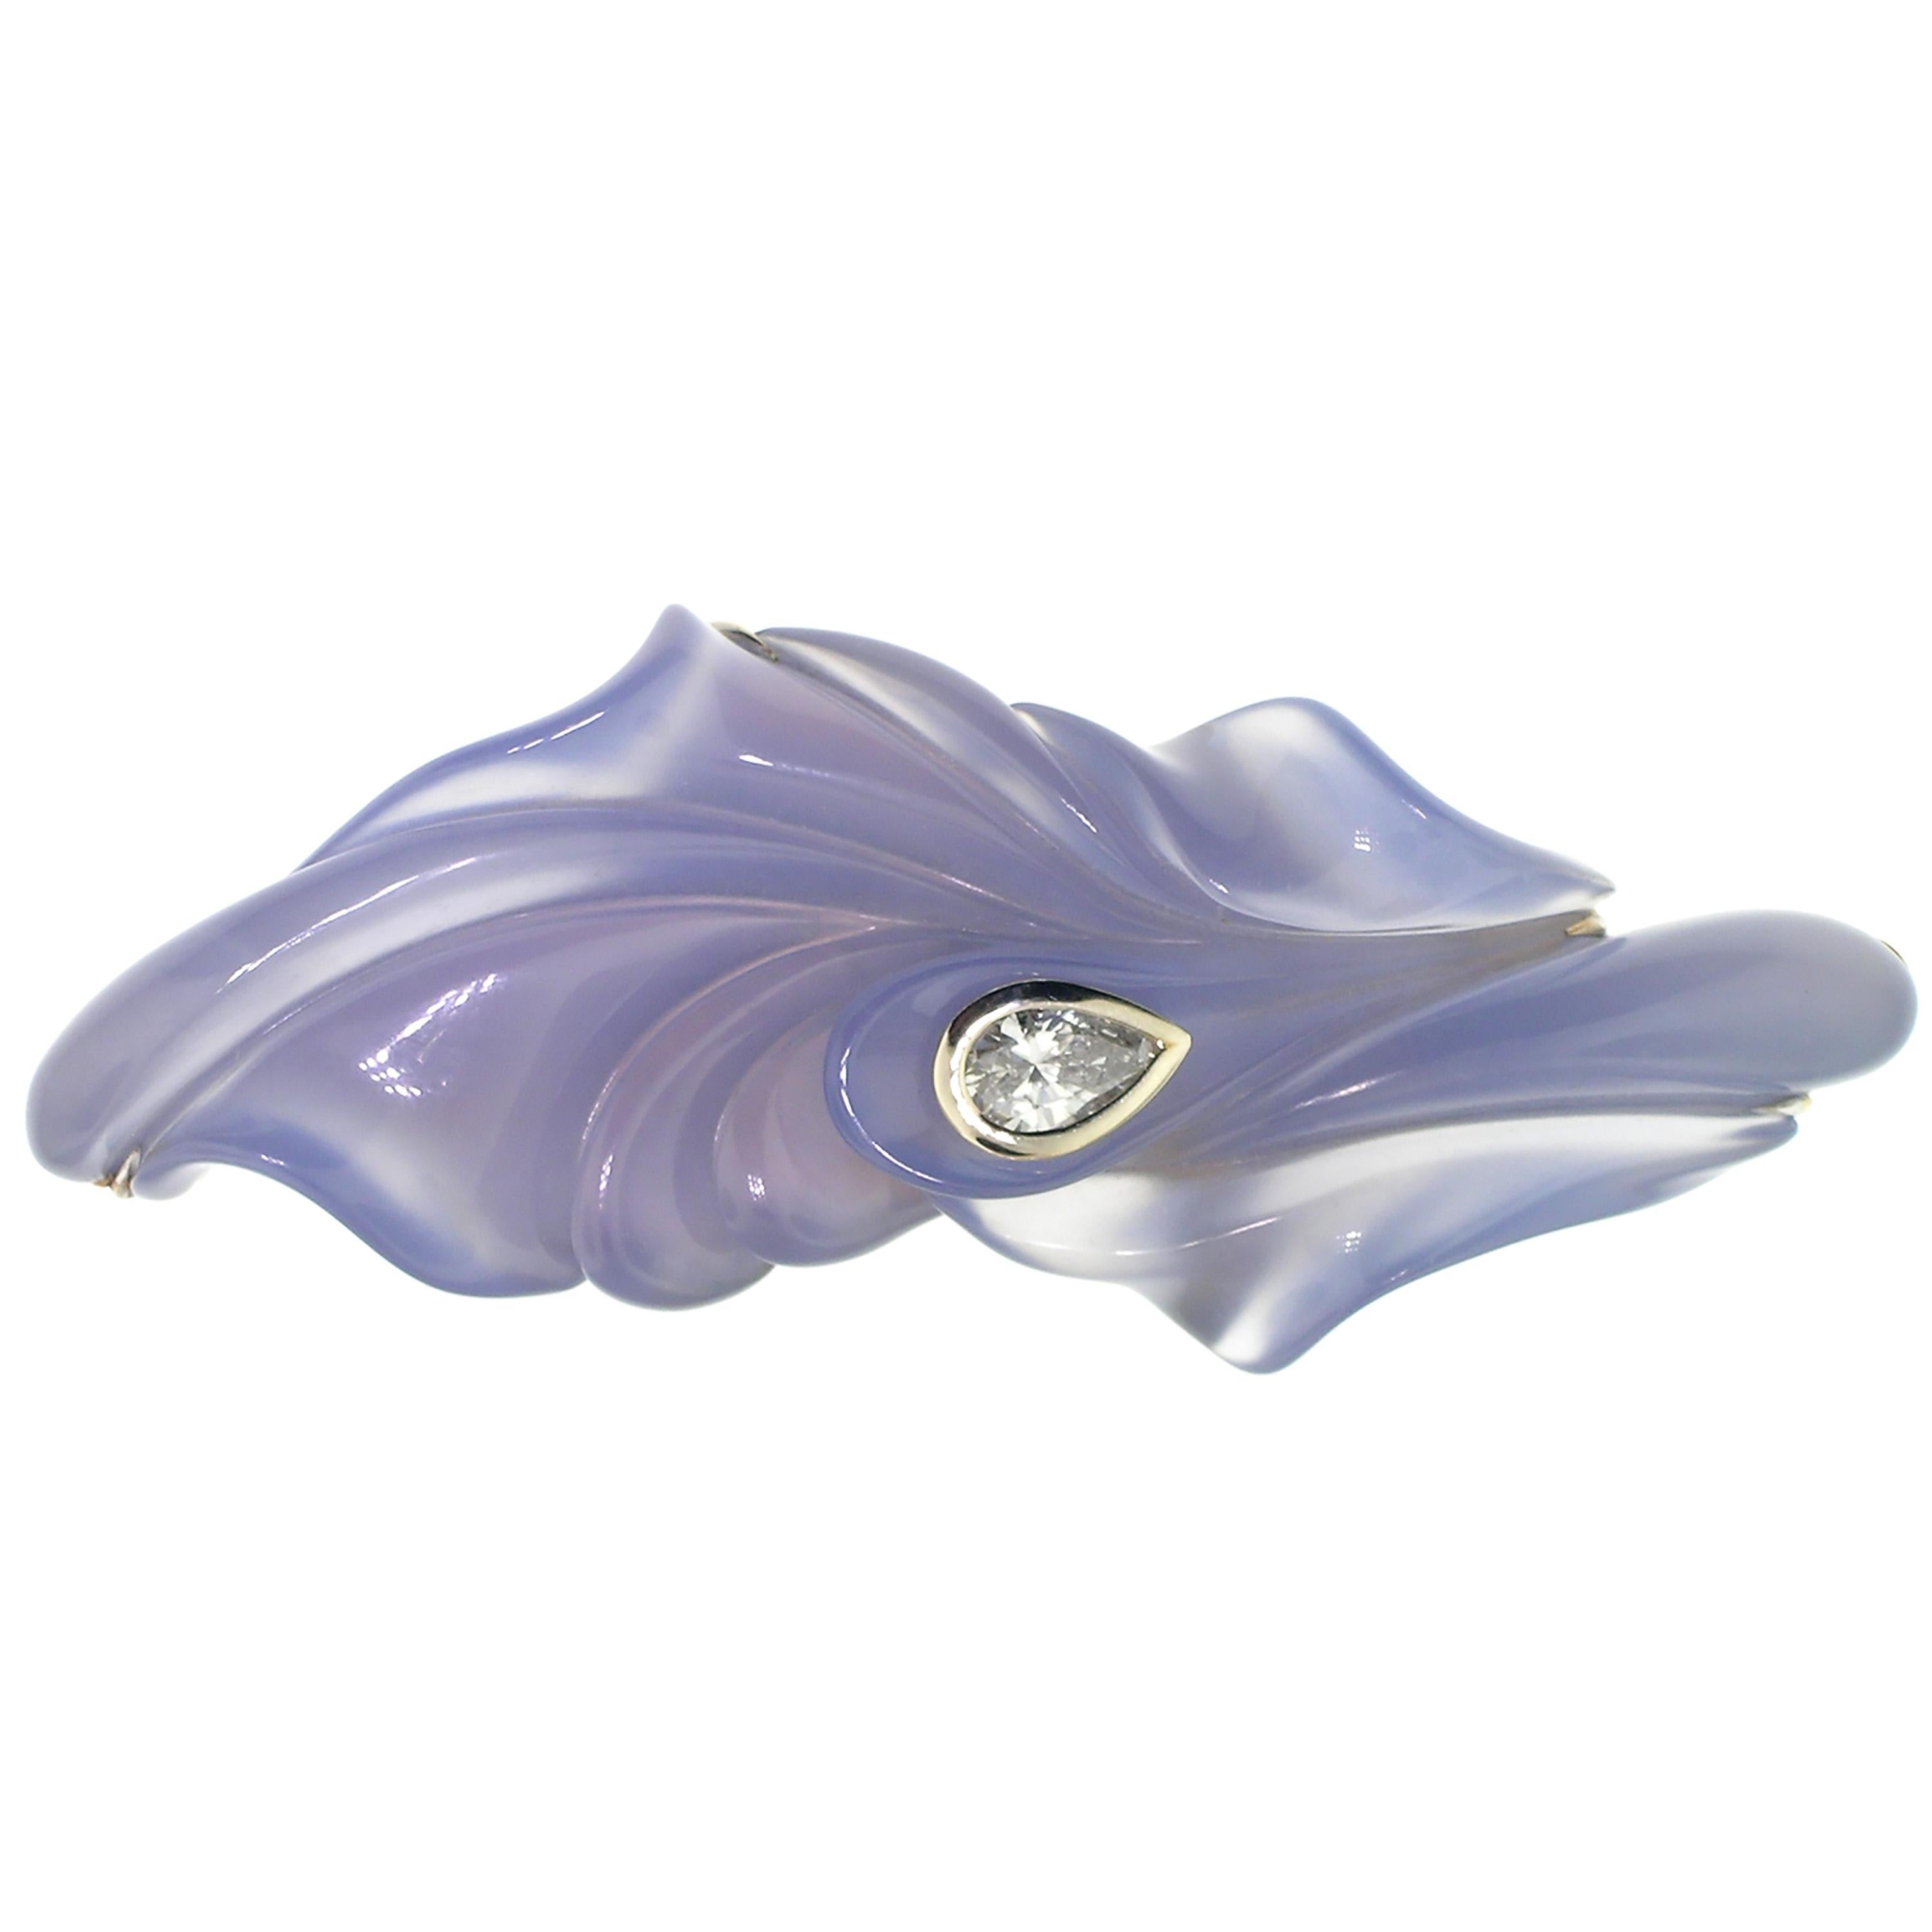 This exquisite sculpture was carved in luxuriously luminescent blue chalcedony by American lapidary master Steve Walters. The drama in this piece of jewelry cannot be overstated; the large scale of the exquisite chalcedony and the gorgeous movement